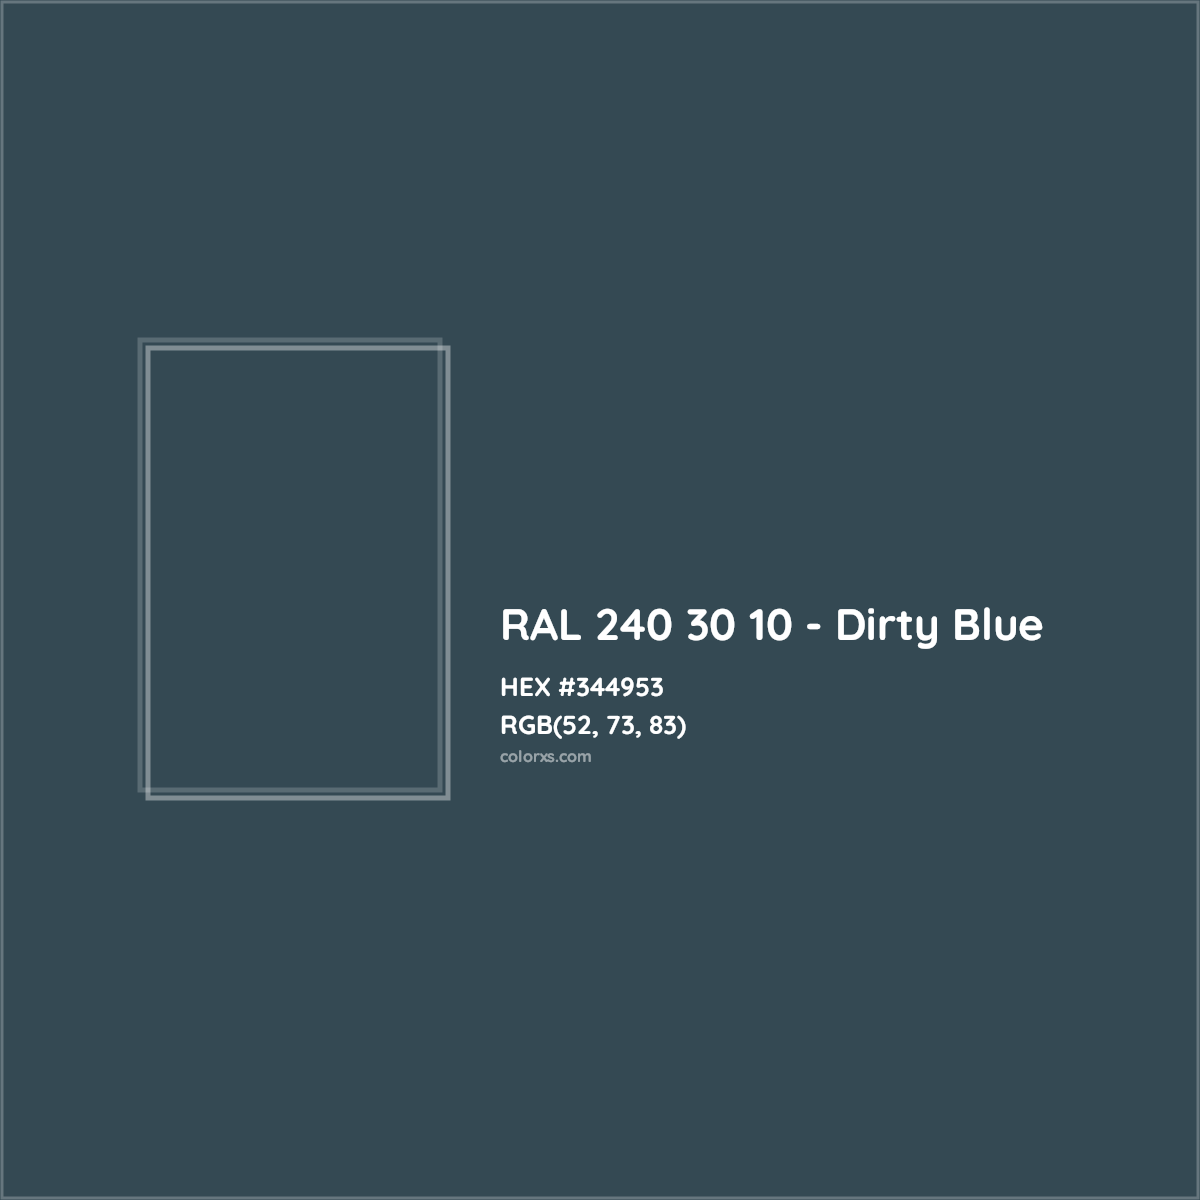 HEX #344953 RAL 240 30 10 - Dirty Blue CMS RAL Design - Color Code